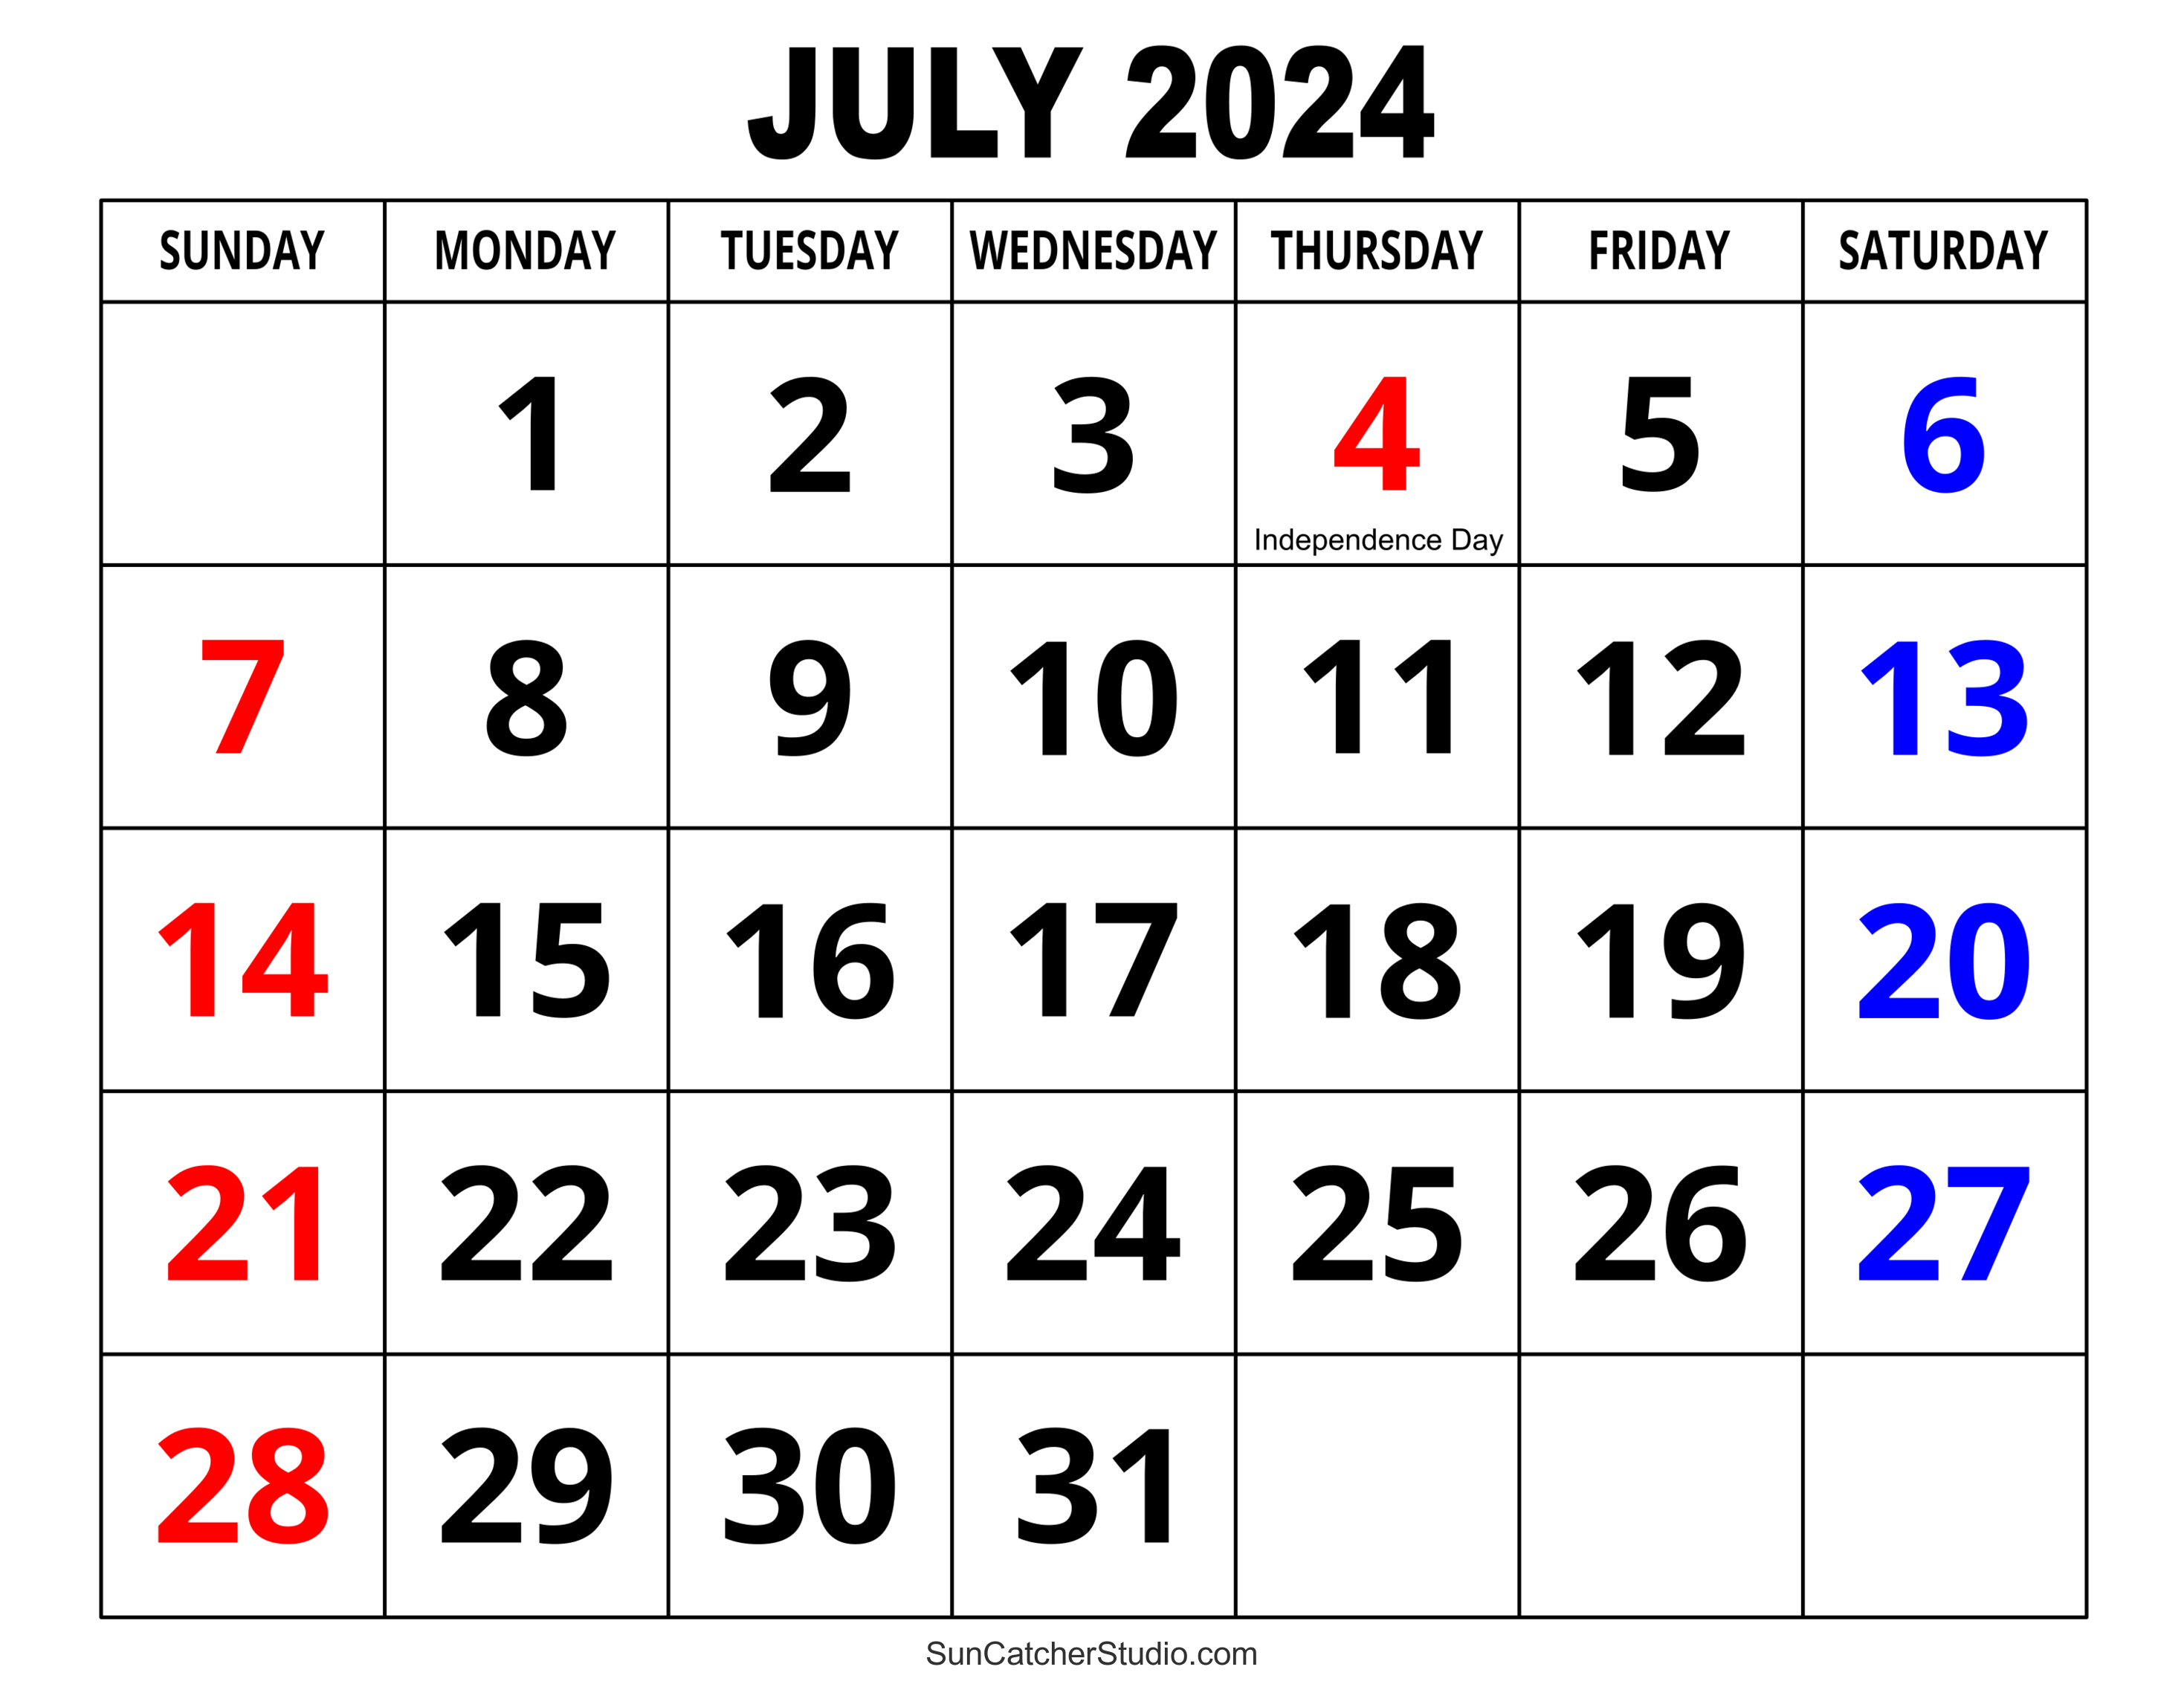 July 2024 Calendar (Free Printable) – Diy Projects, Patterns inside Free Printable Calendar 2024 Big Numbers